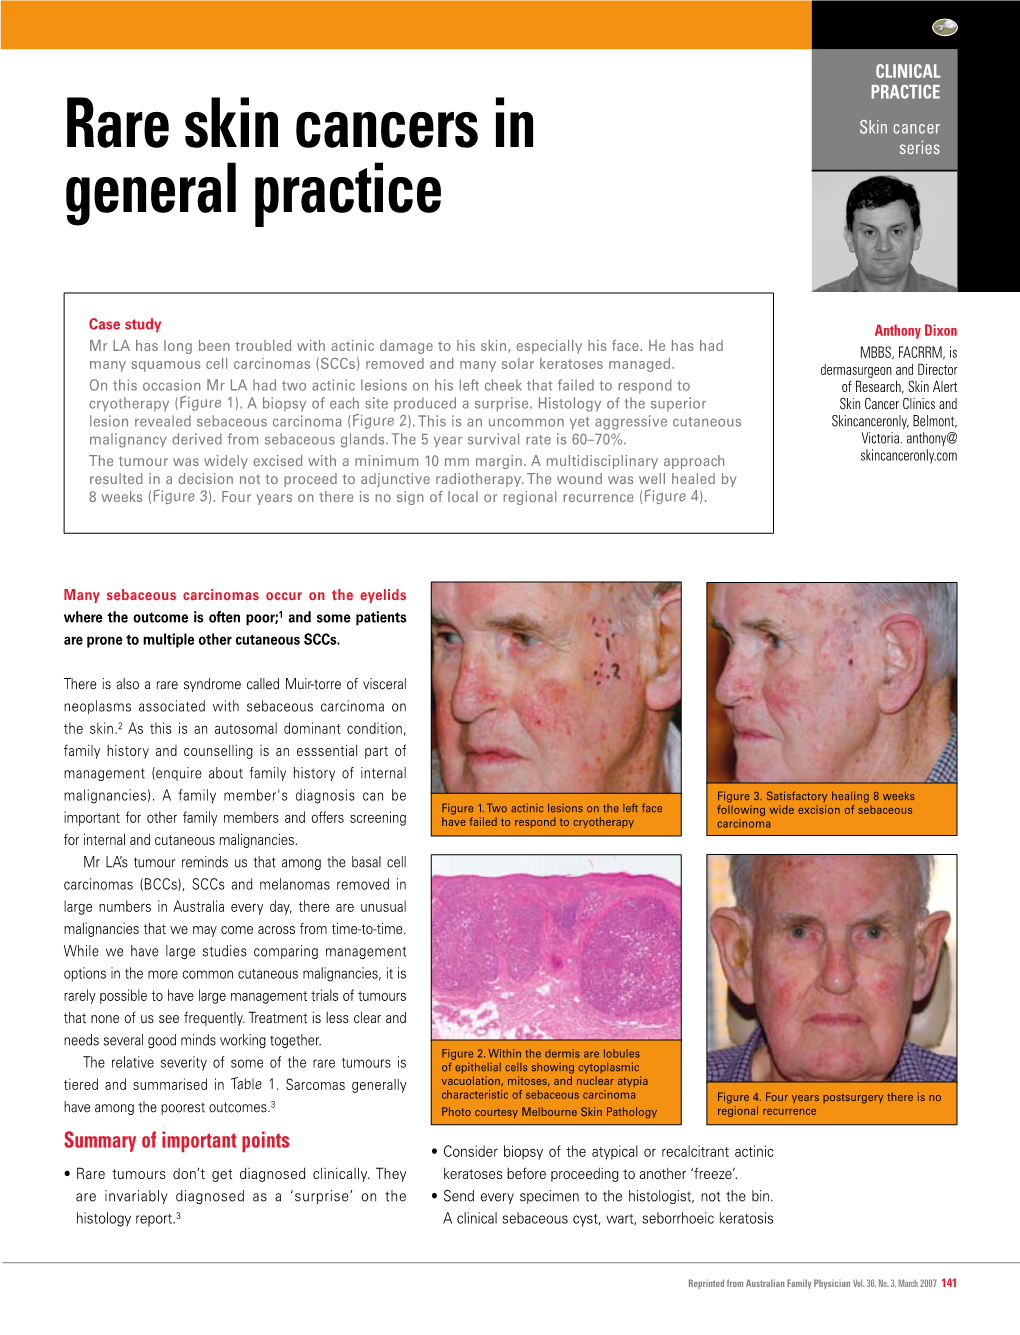 Rare Skin Cancers in General Practice